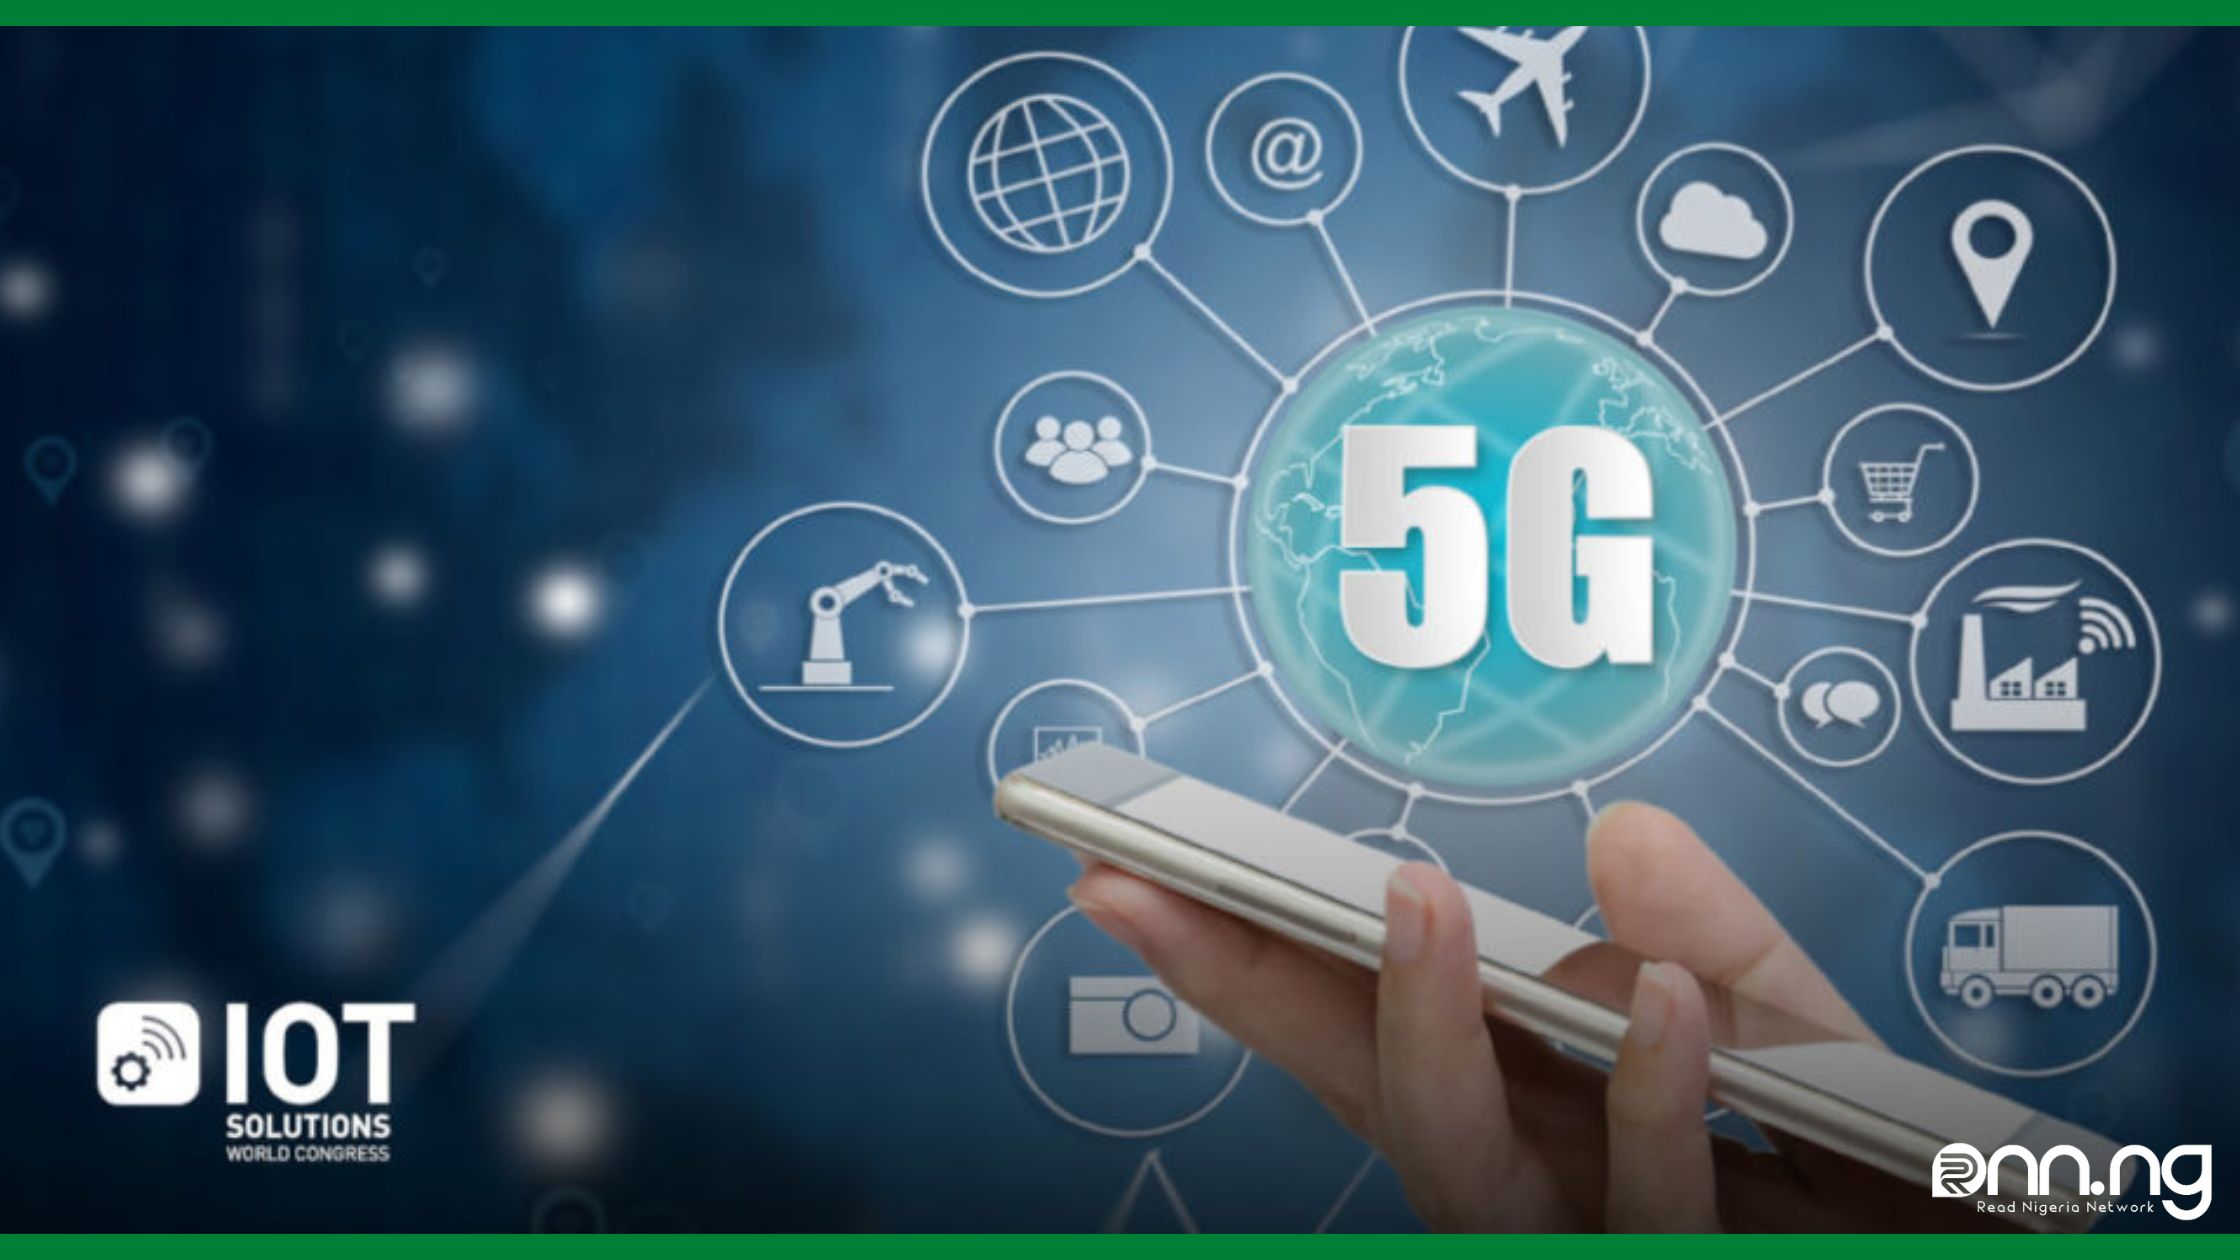 Nigeria, South Africa to push Africa’s 5G connections to 150 million by 2028